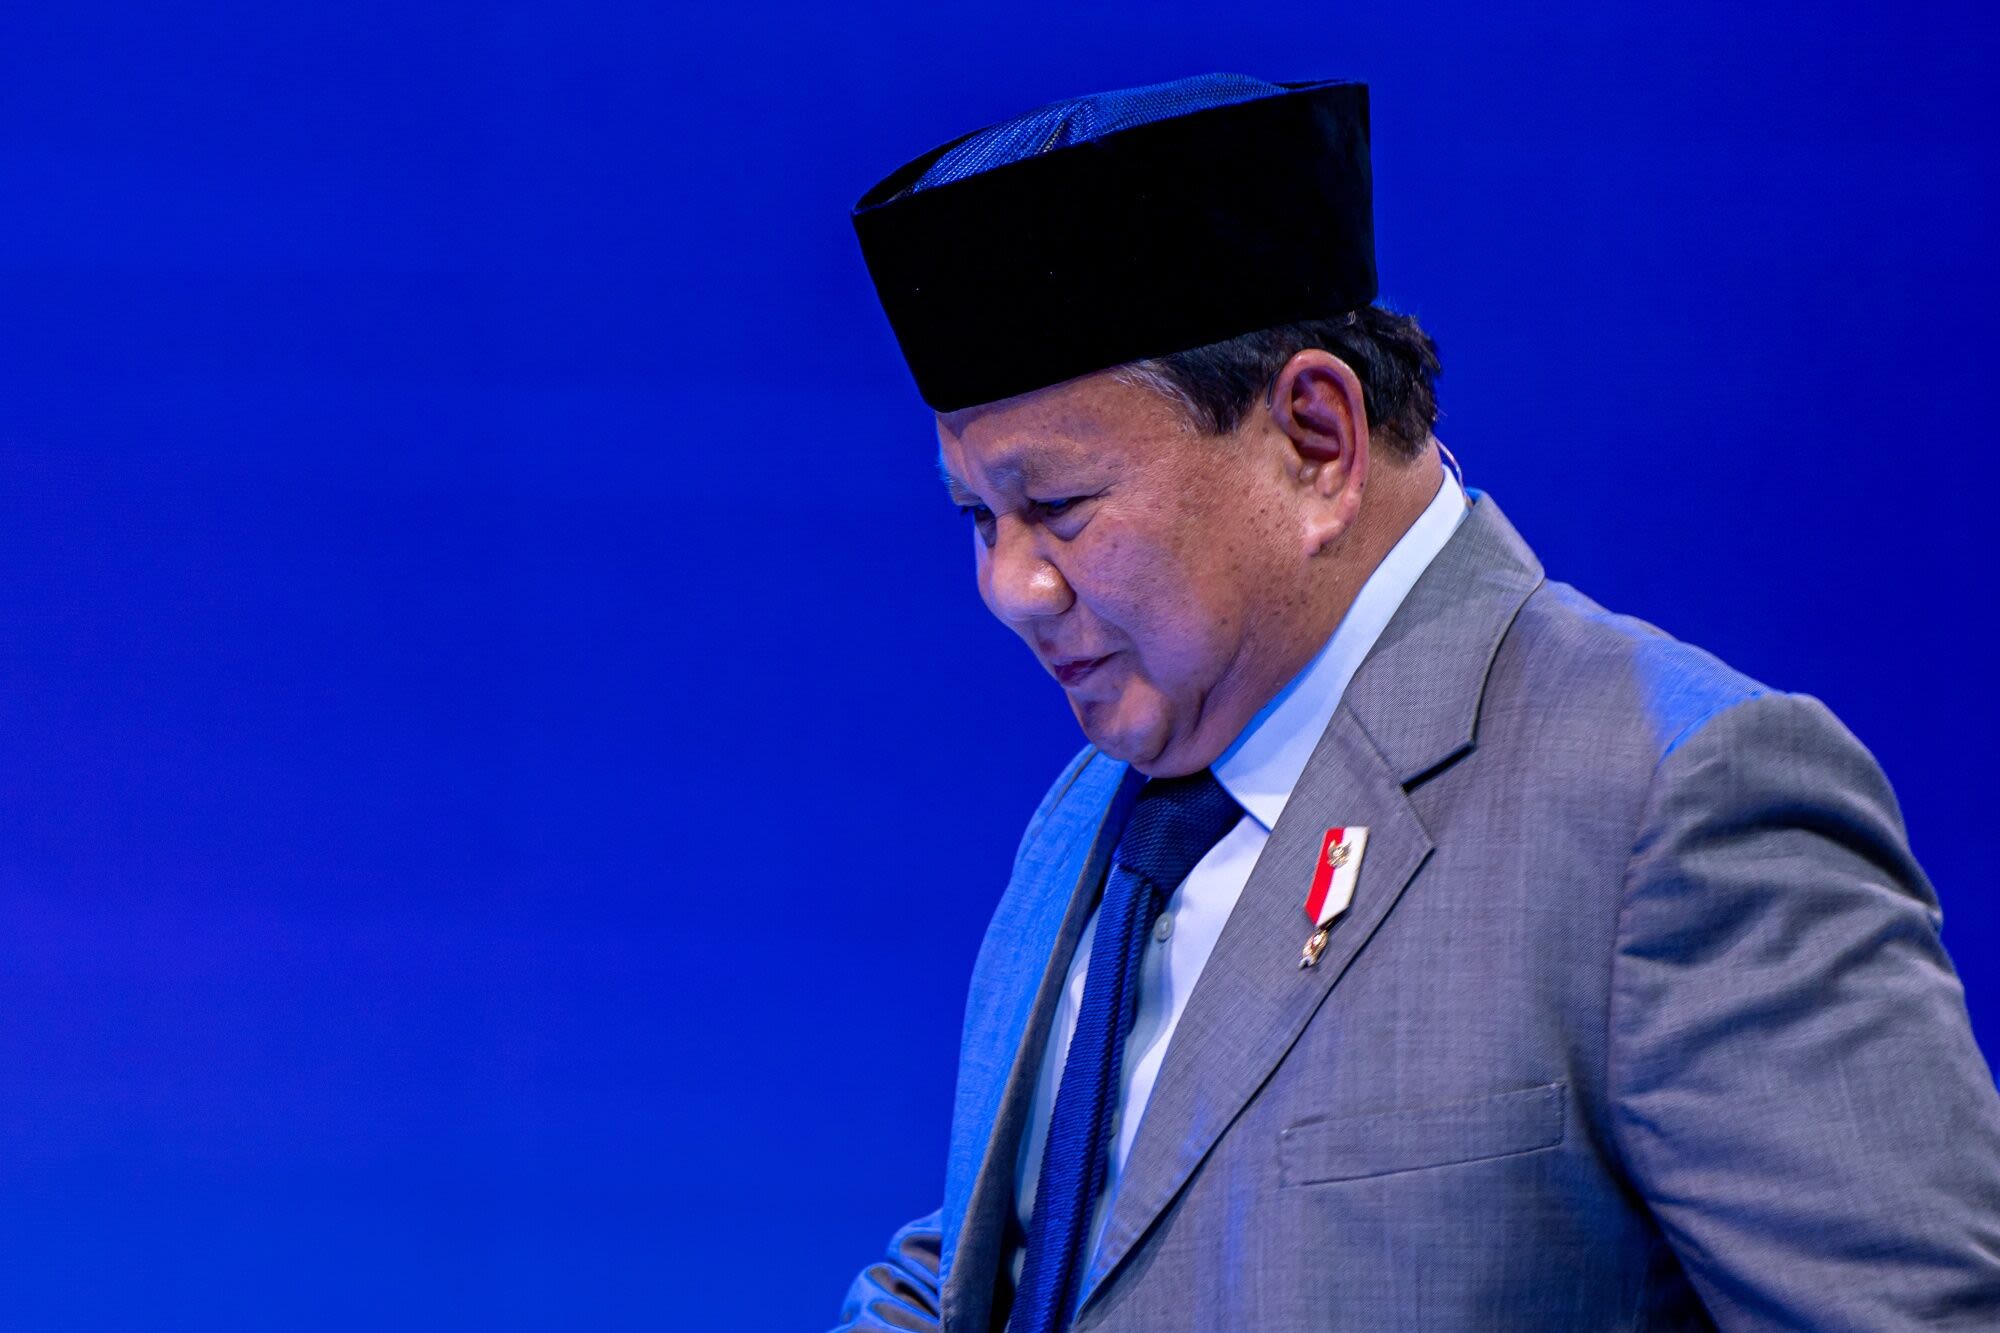 Prabowo Courts Biggest Party to Control 79% of Parliament Seats